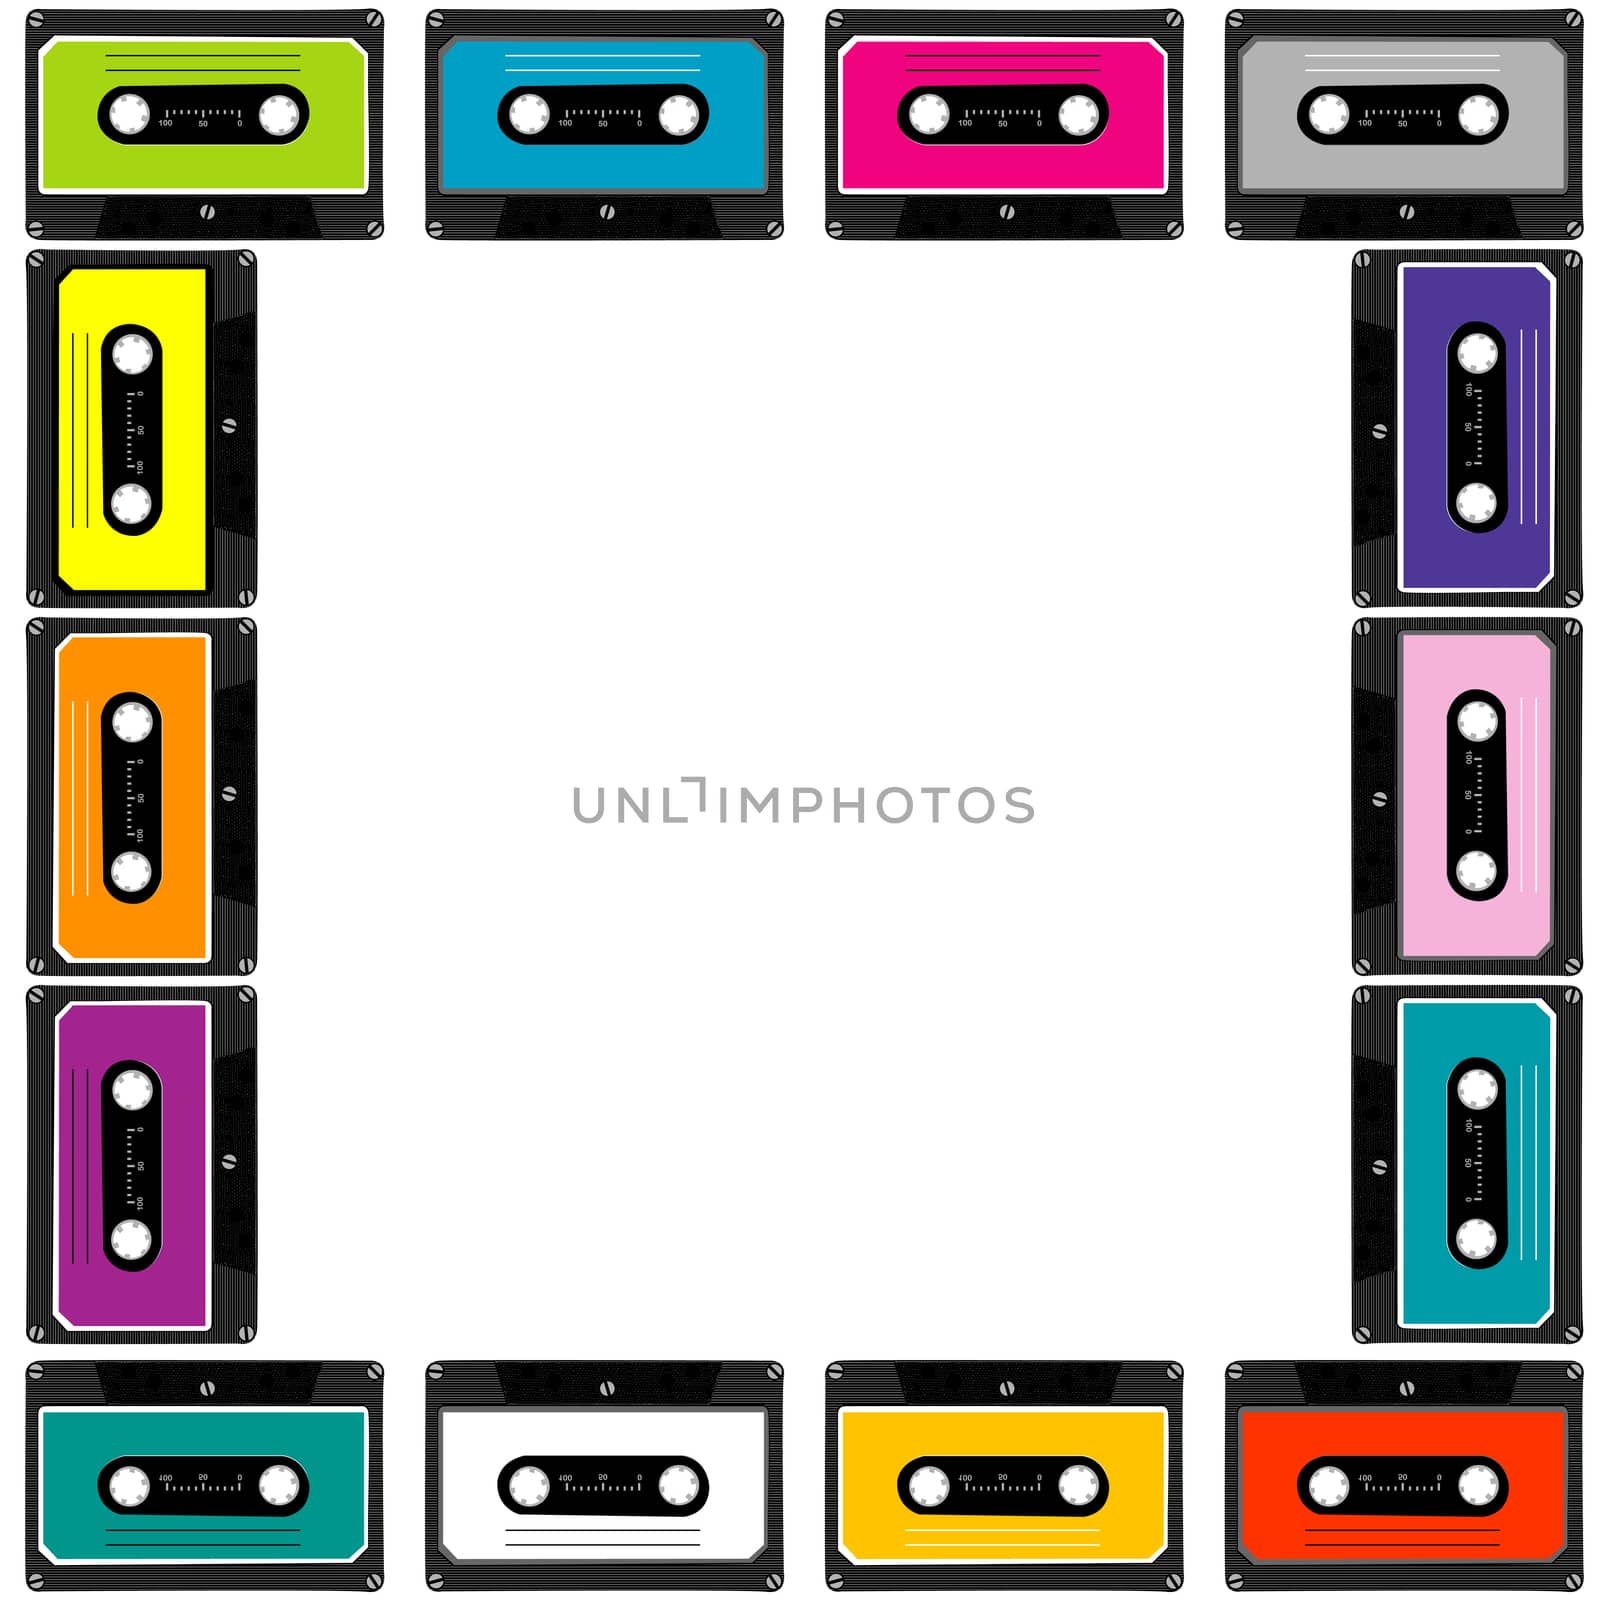 Colorful frame with cassettes by hibrida13